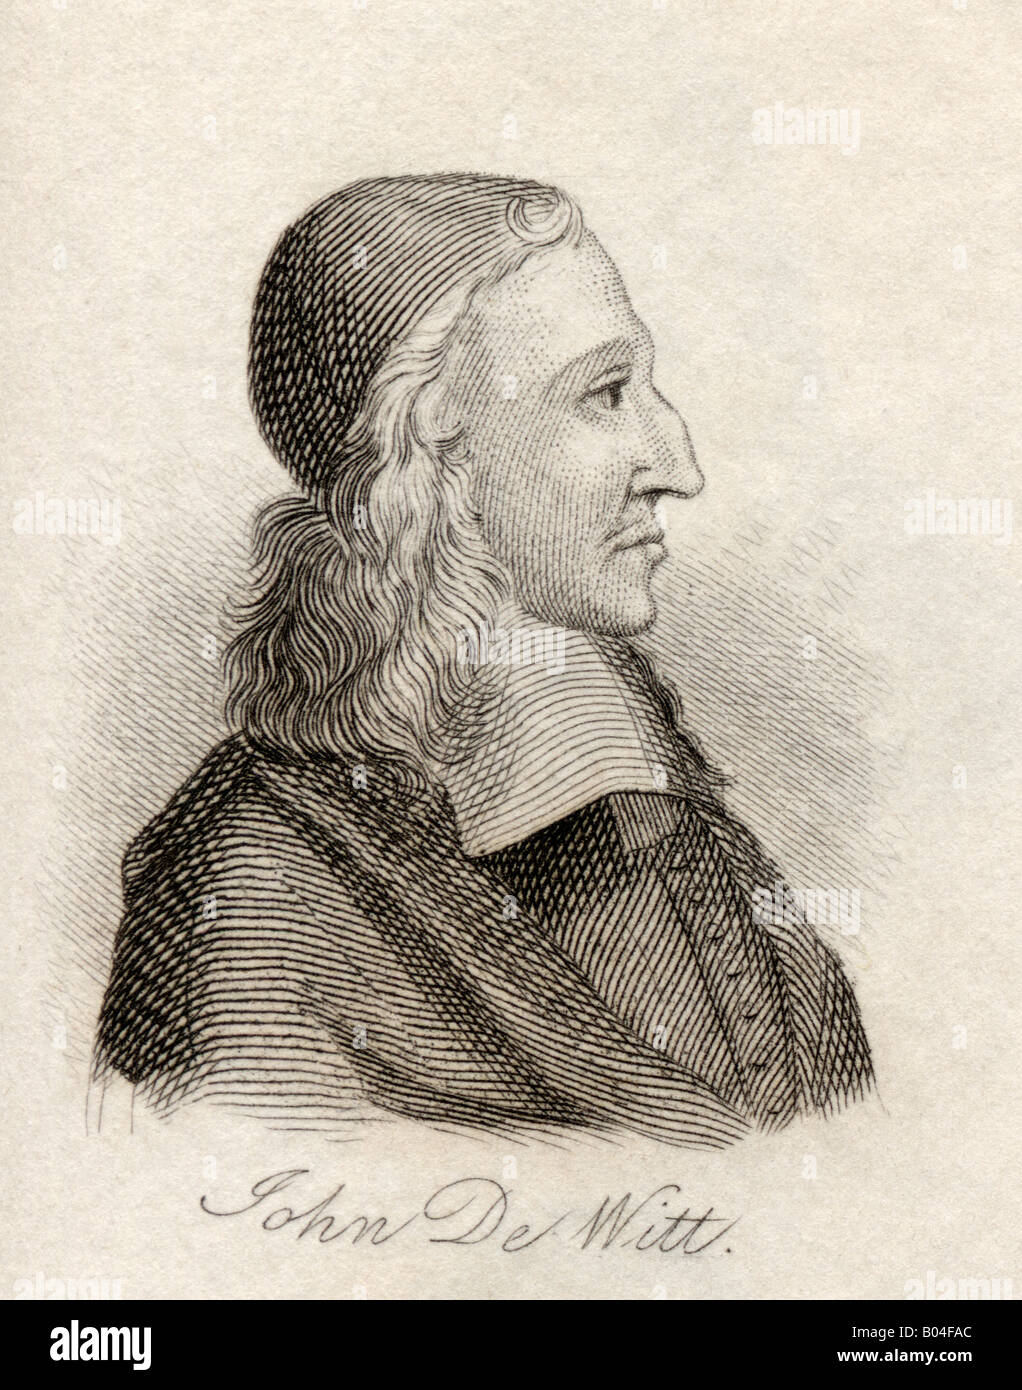 Johan de Witt, 1625  - 1672. Dutch statesman, political leader of Holland. From the book Crabbs Historical Dictionary, published 1825. Stock Photo